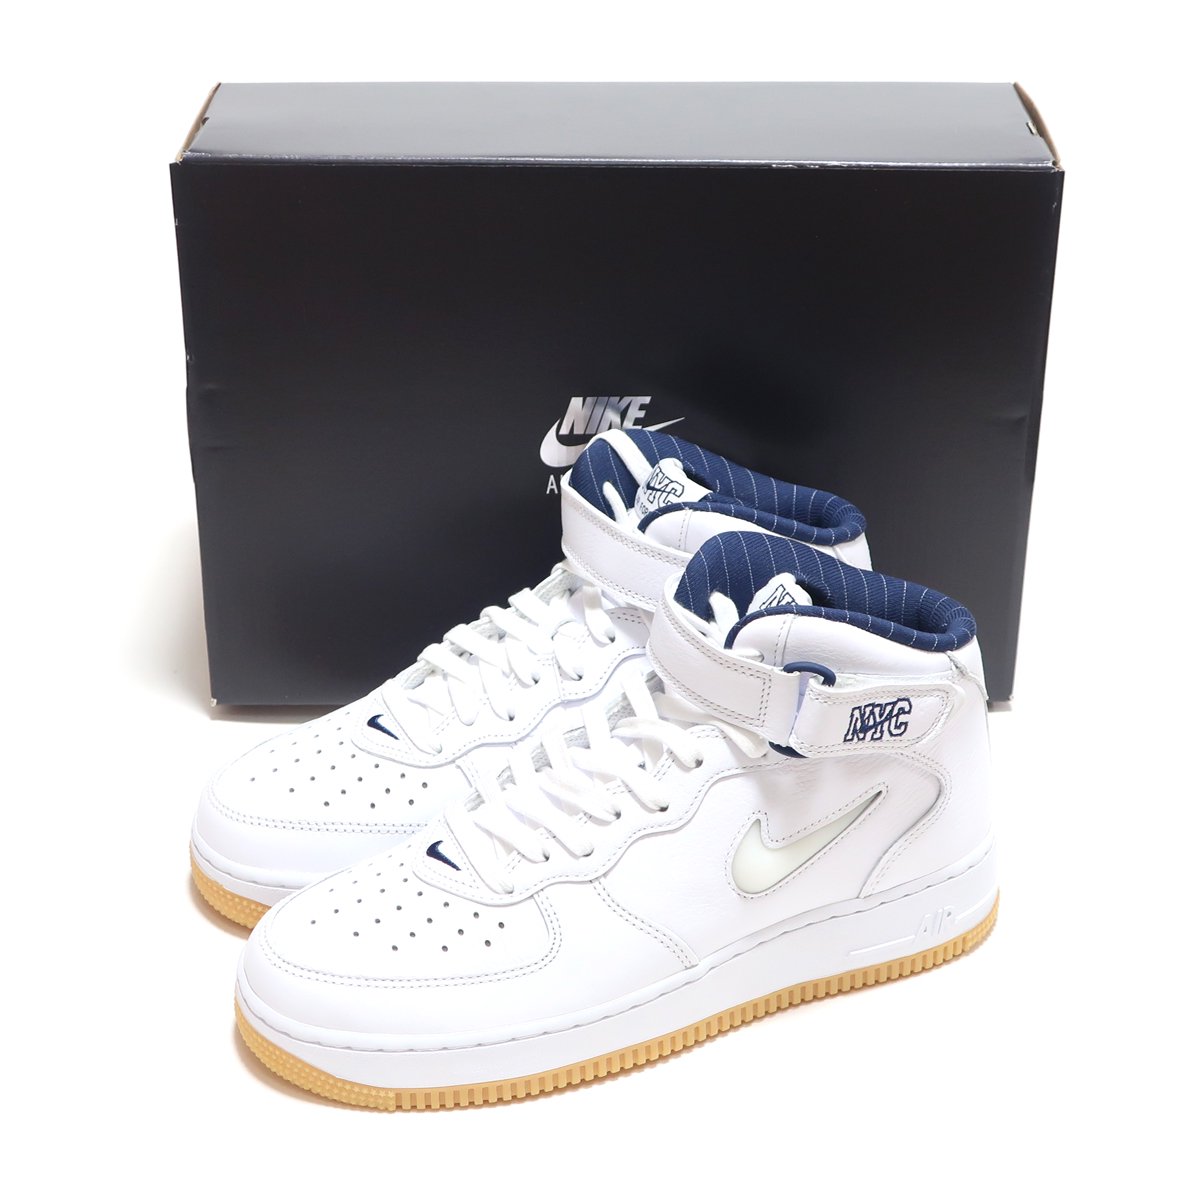 NIKE AIR FORCE 1 MID QS WHITE/WHITE-MIDNIGHT NAVY NYC NEW YORK 